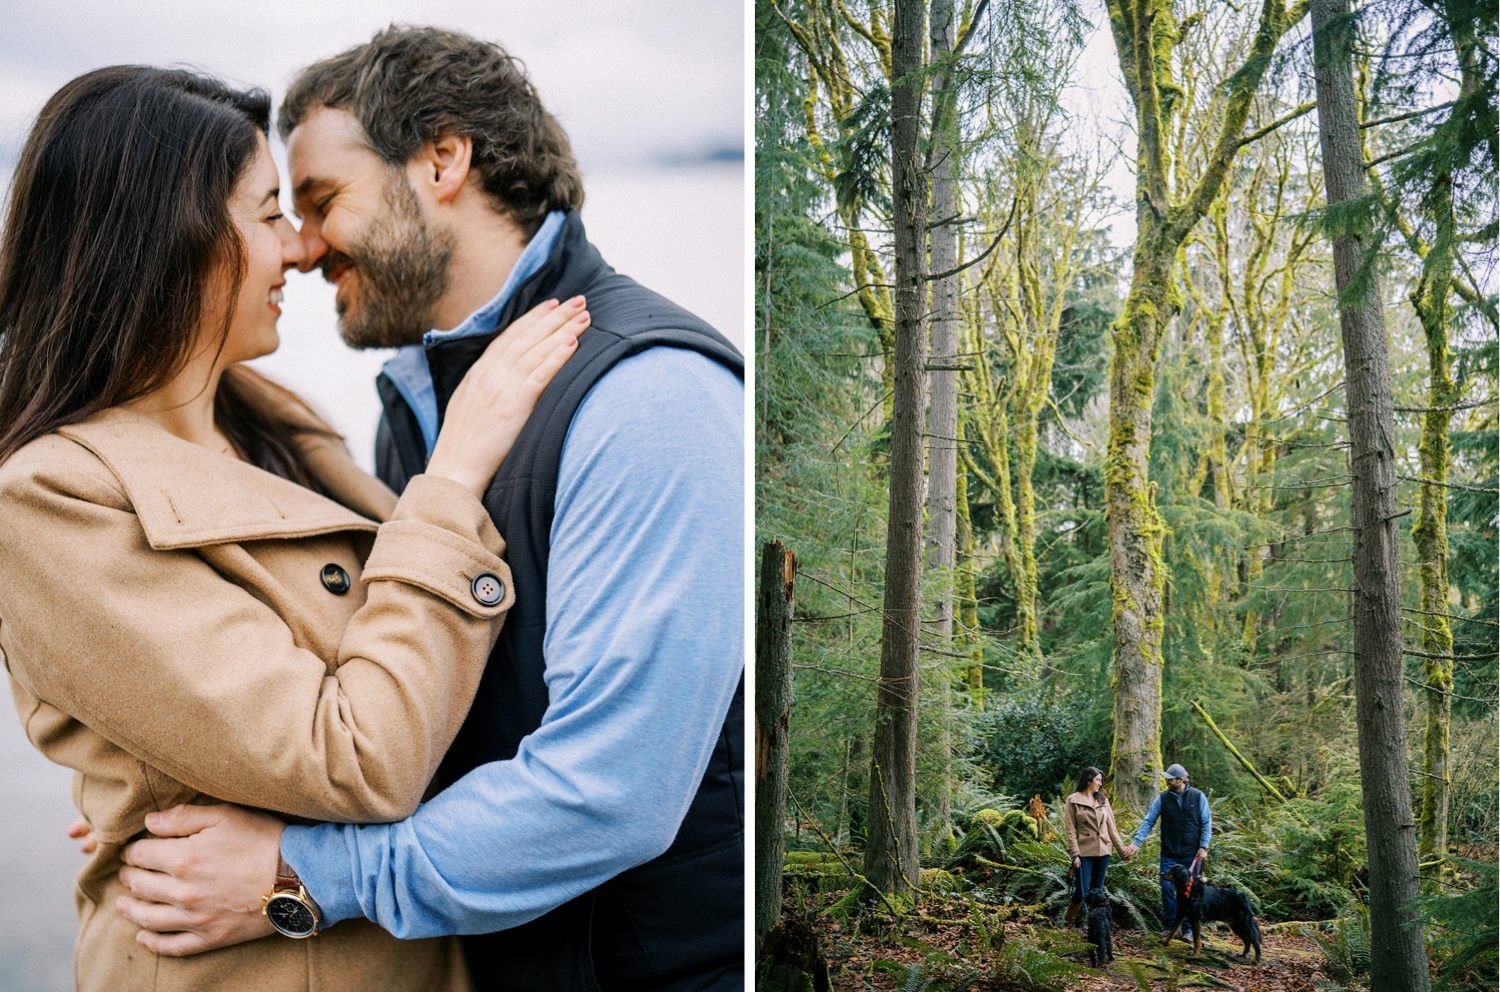 203_Pt Defiance engagement session in Tacoma by Ryan Flynn Photography.jpg